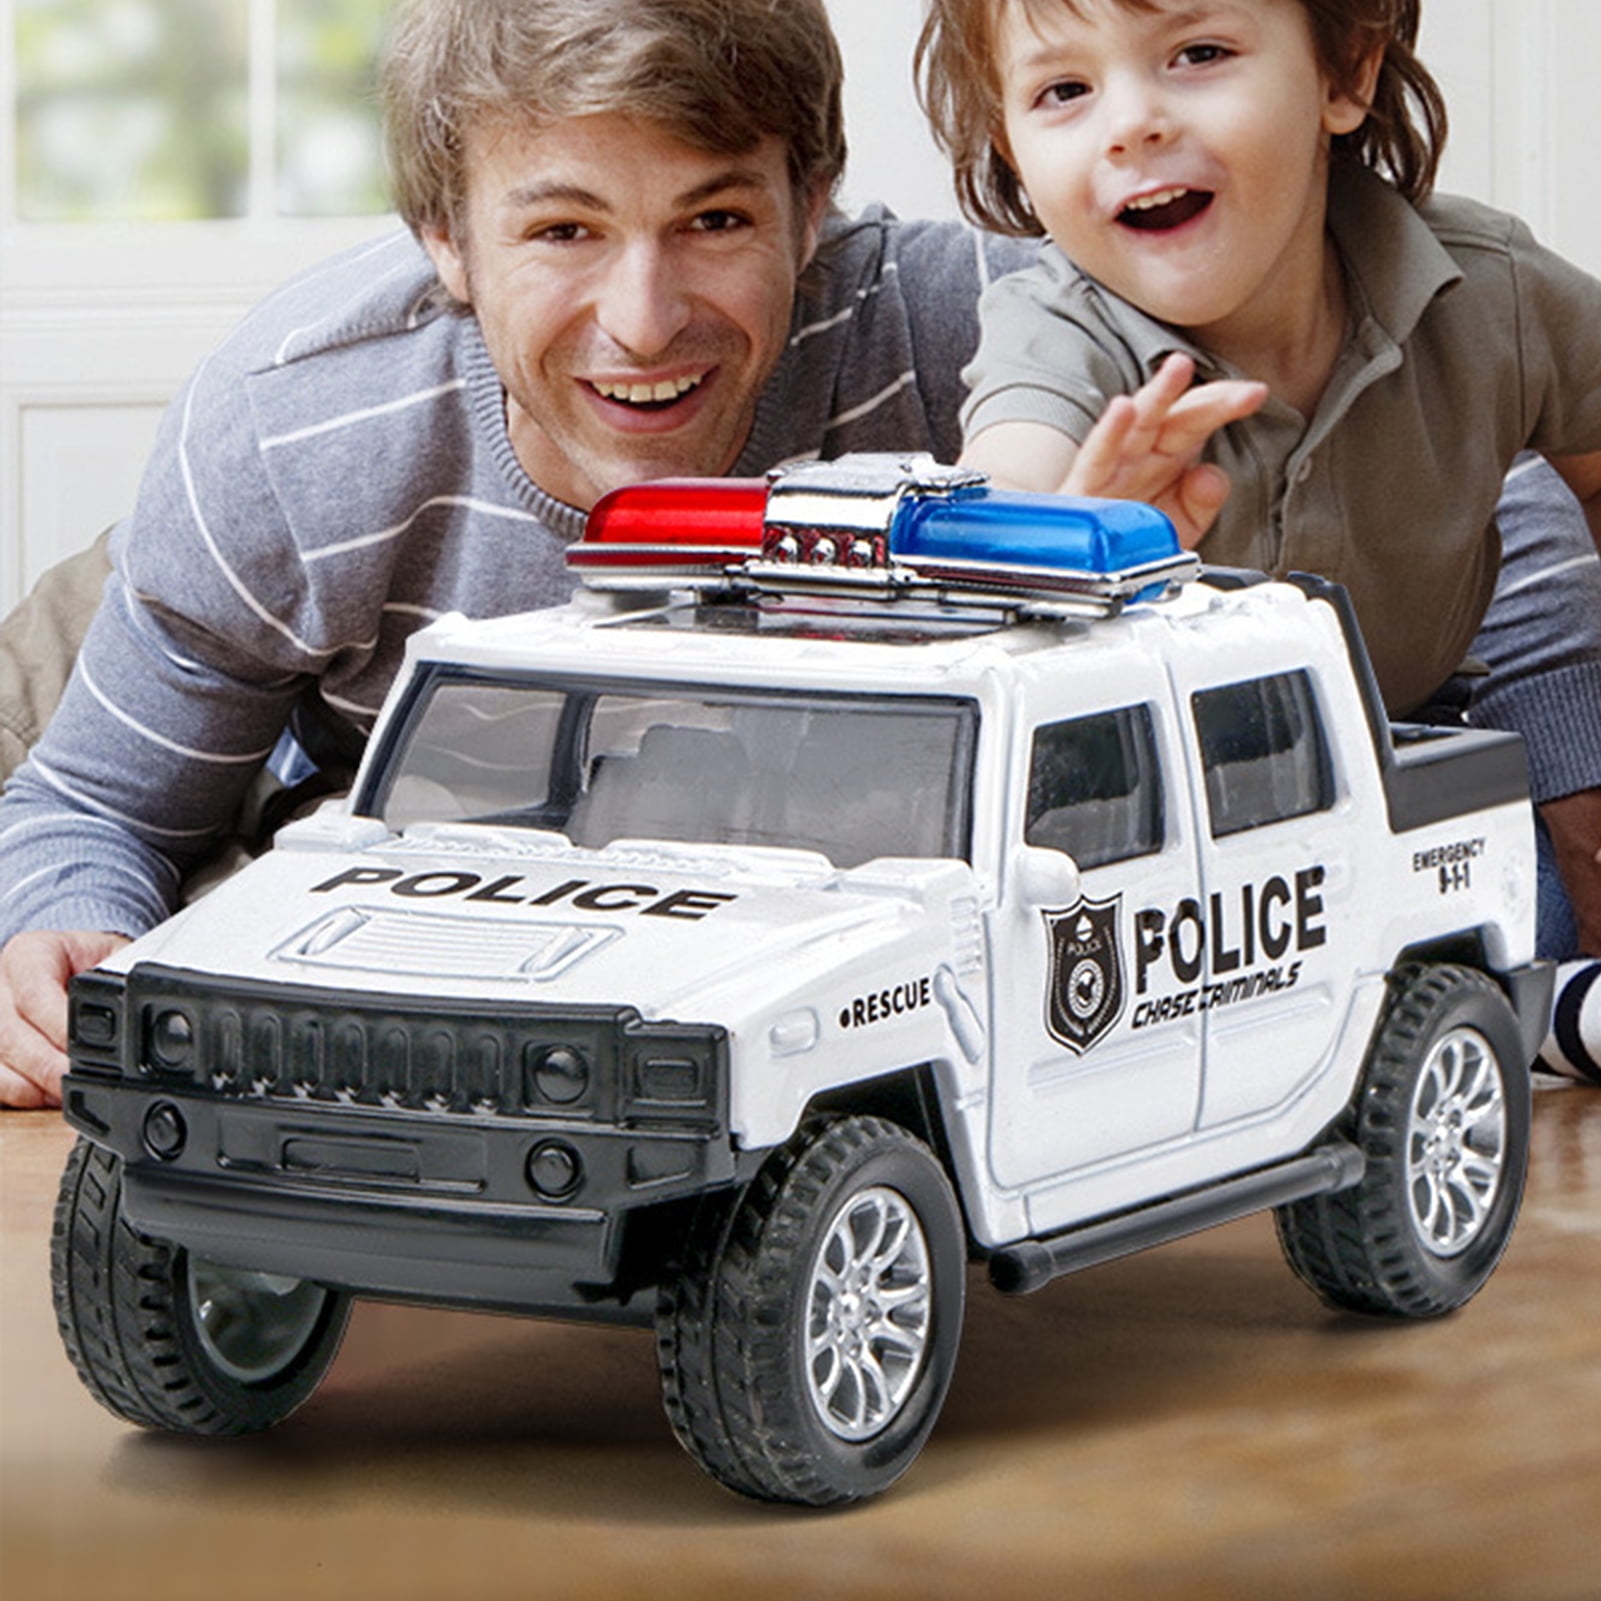 Police pull over toddler in toy car